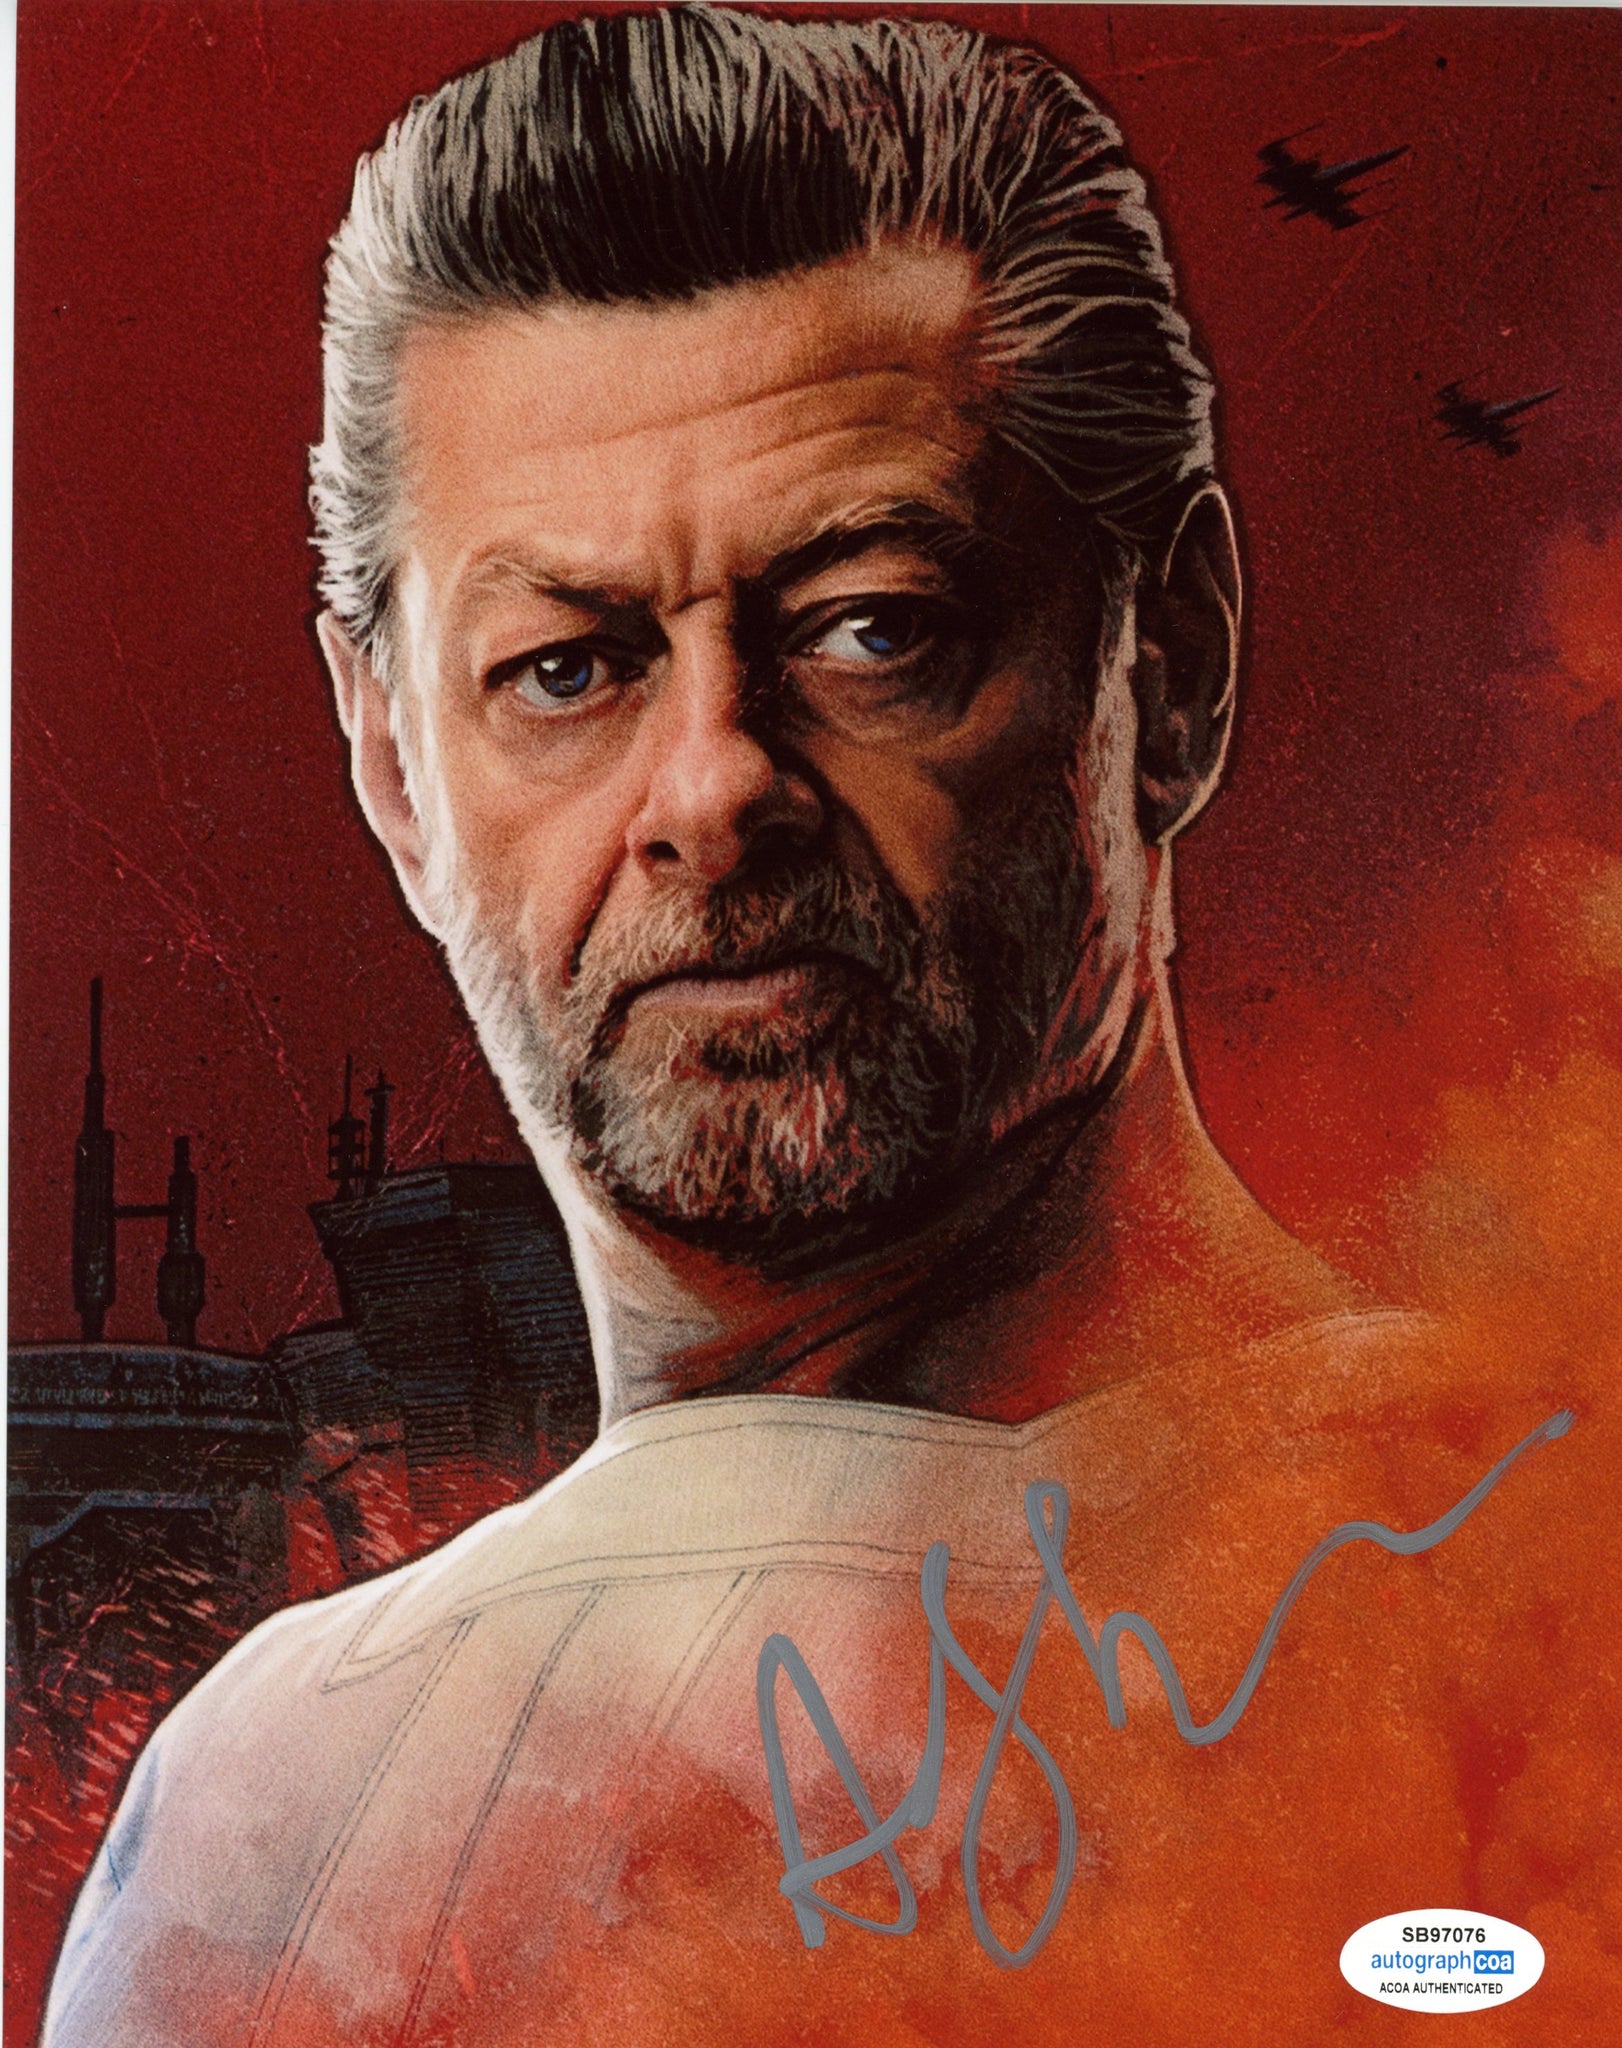 Andy Serkis Andor Signed Autograph 8x10 Photo ACOA